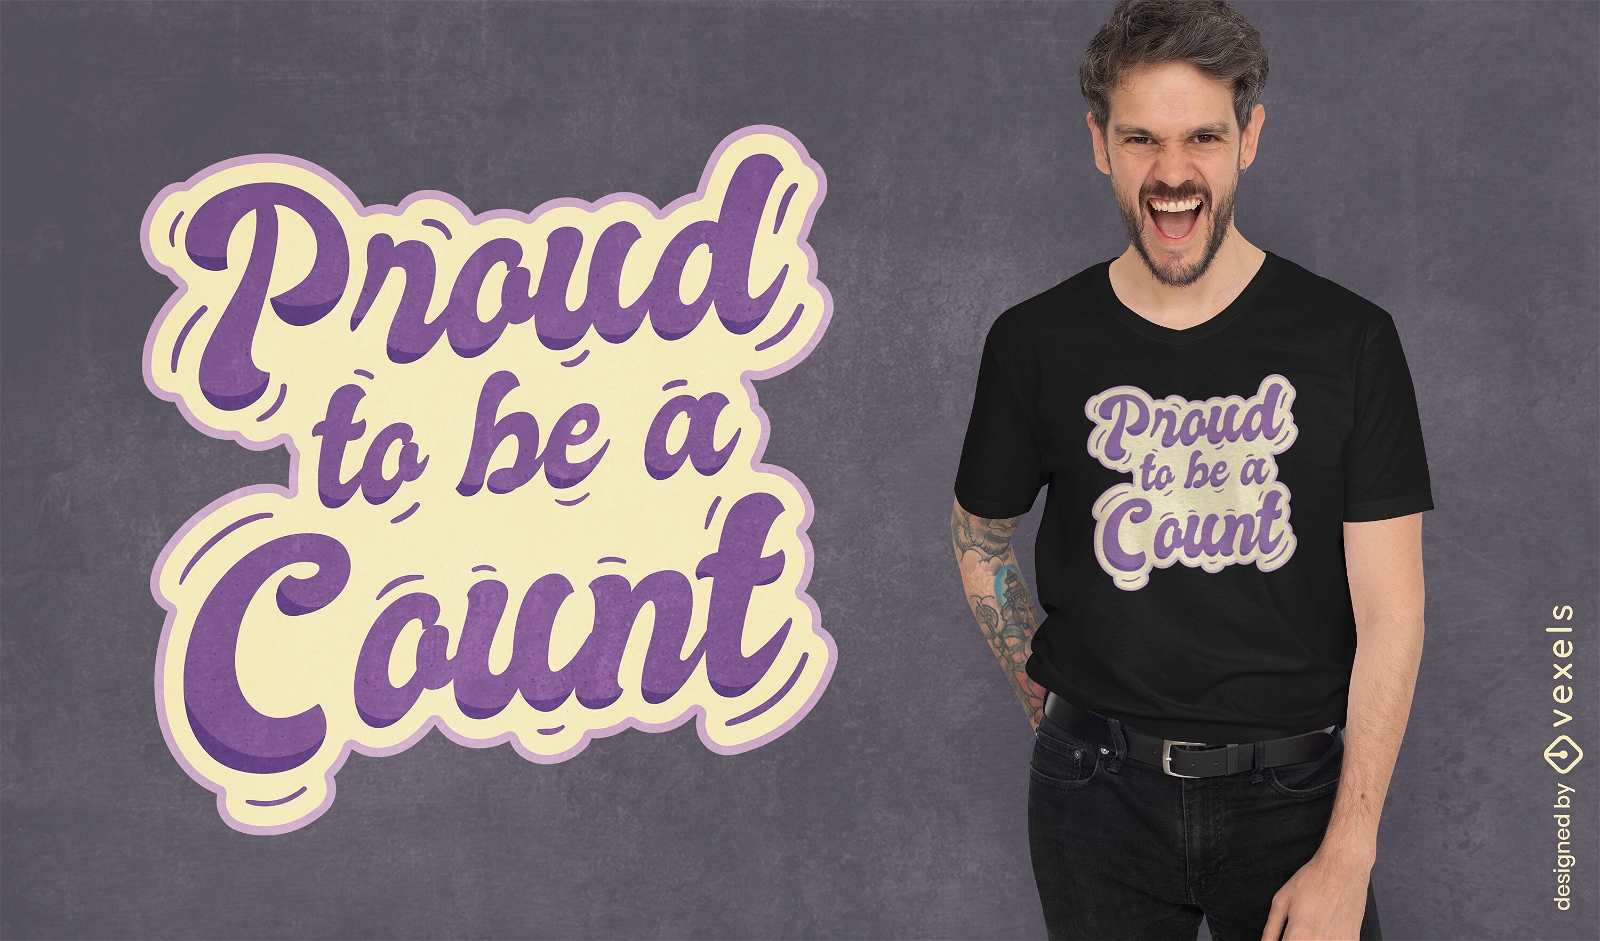 Produd to be a count t-shirt design